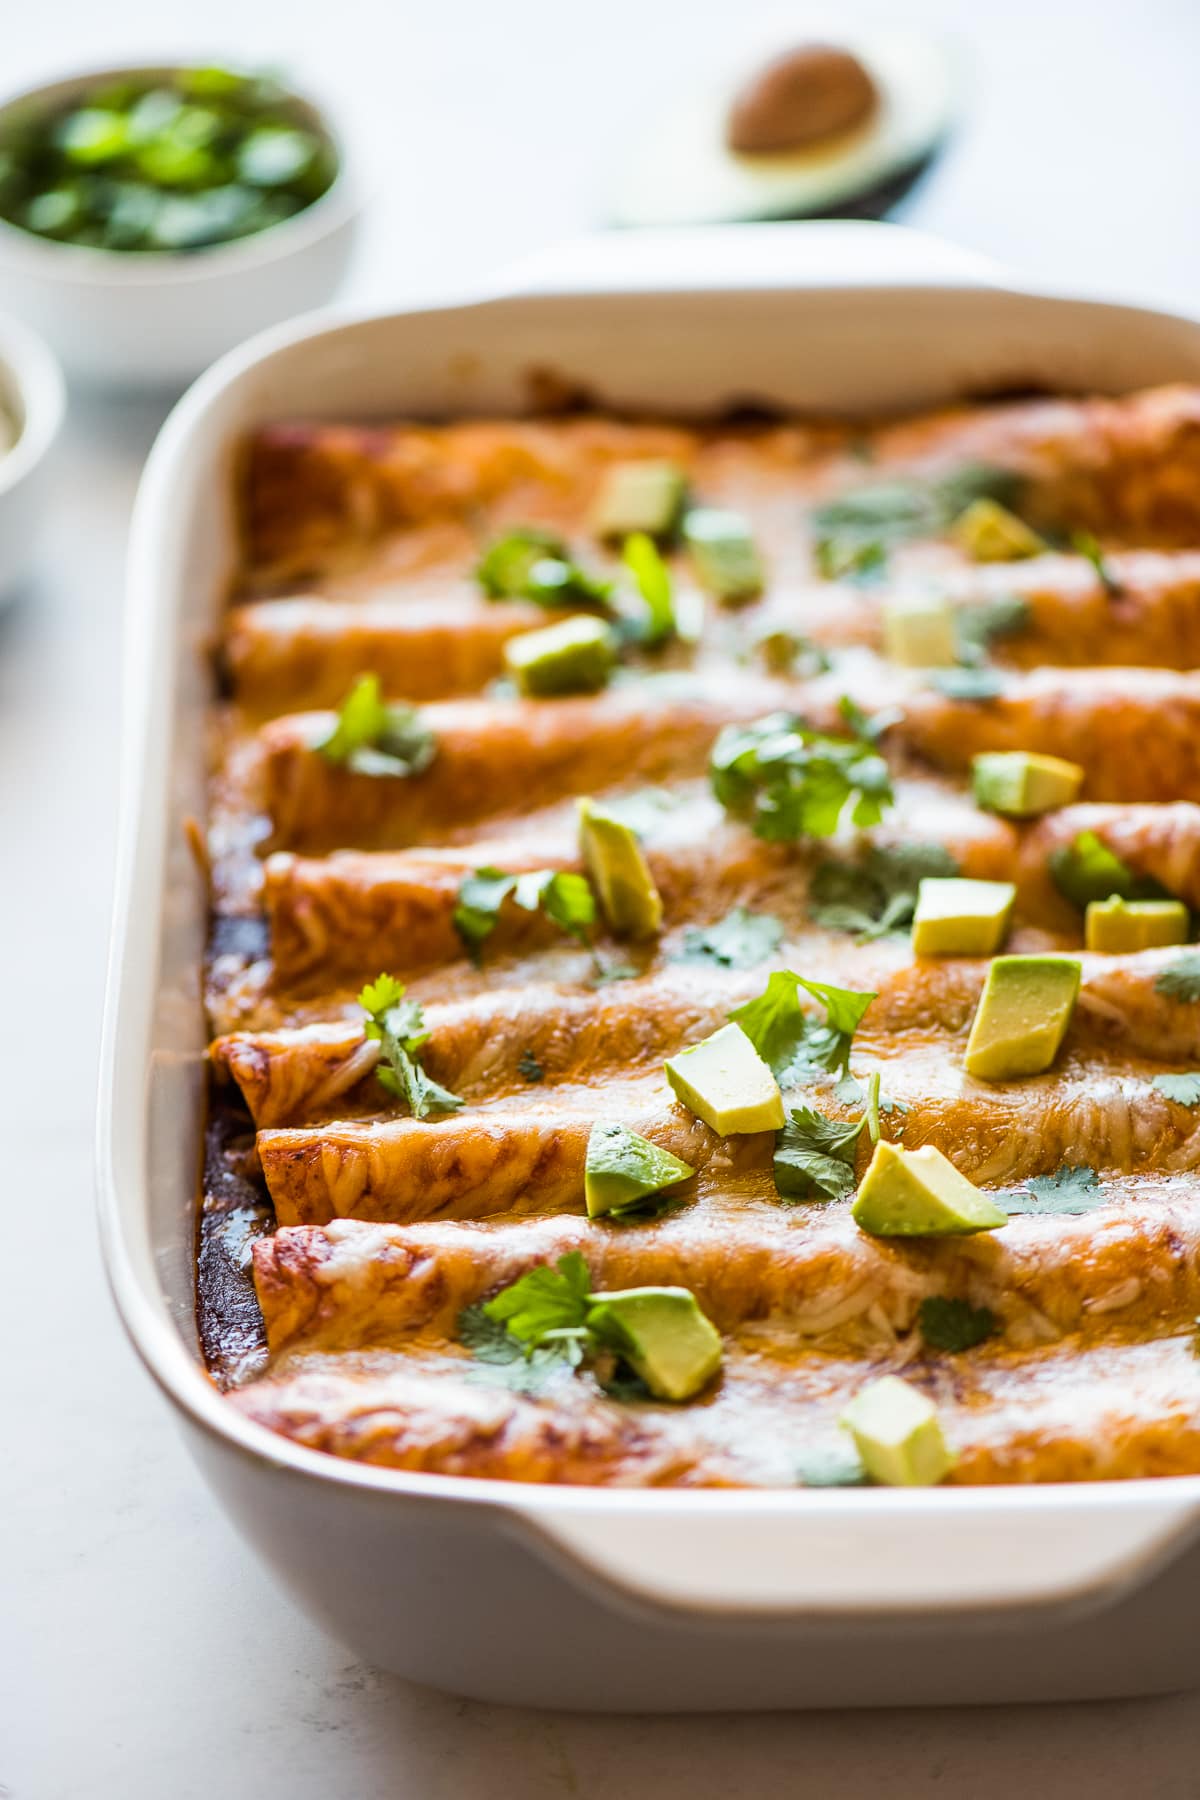 Black bean enchiladas topped with diced avocados and cilantro in a baking dish.